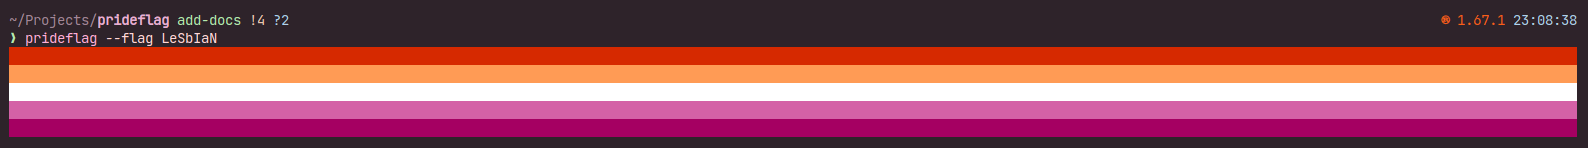 Output of the program, run with --flag LeSbIaN (lesbian is written with weird casing)